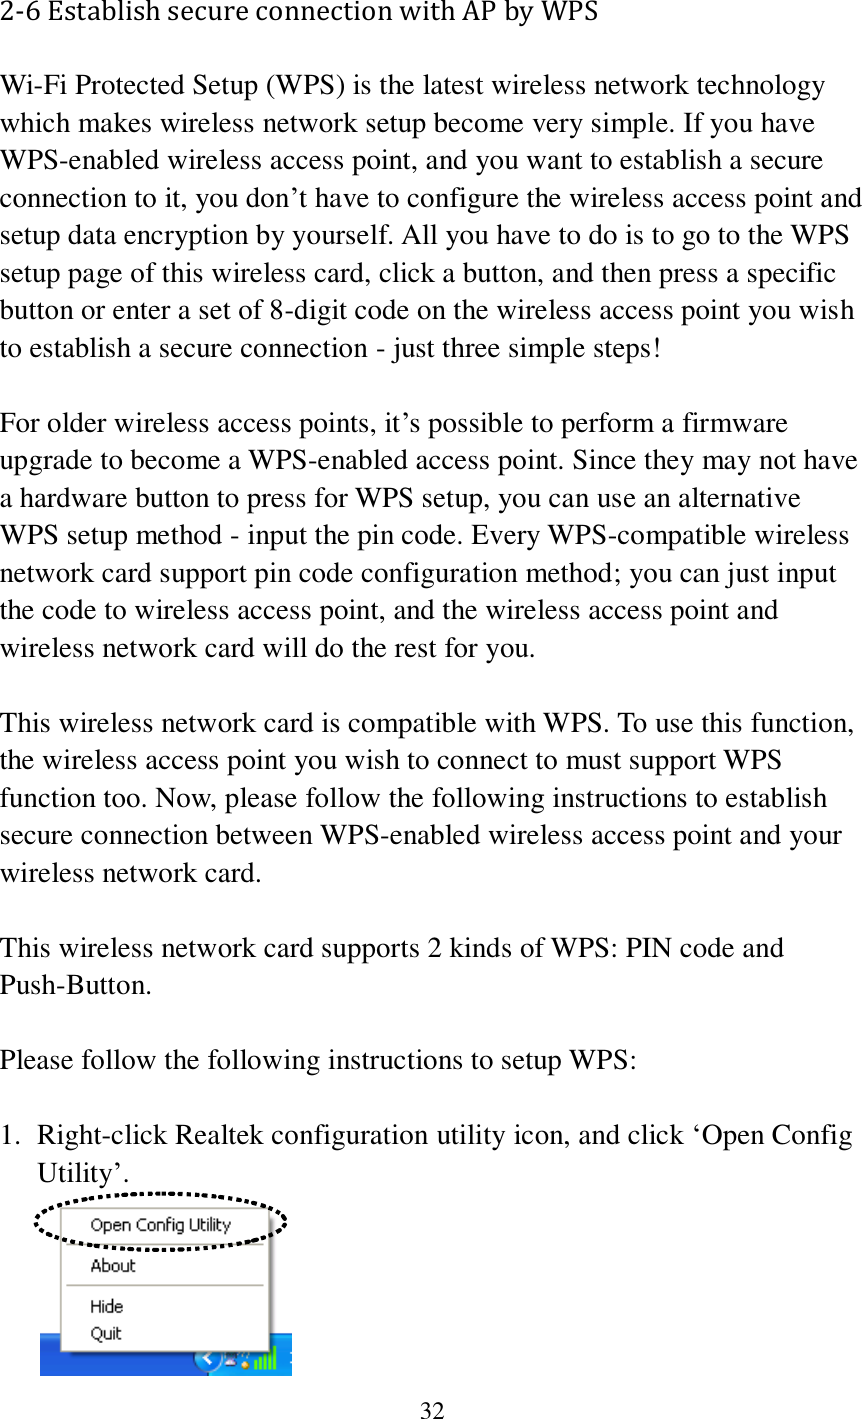 32  2-6 Establish secure connection with AP by WPS Wi-Fi Protected Setup (WPS) is the latest wireless network technology which makes wireless network setup become very simple. If you have WPS-enabled wireless access point, and you want to establish a secure connection to it, you don’t have to configure the wireless access point and setup data encryption by yourself. All you have to do is to go to the WPS setup page of this wireless card, click a button, and then press a specific button or enter a set of 8-digit code on the wireless access point you wish to establish a secure connection - just three simple steps!    For older wireless access points, it’s possible to perform a firmware upgrade to become a WPS-enabled access point. Since they may not have a hardware button to press for WPS setup, you can use an alternative WPS setup method - input the pin code. Every WPS-compatible wireless network card support pin code configuration method; you can just input the code to wireless access point, and the wireless access point and wireless network card will do the rest for you.  This wireless network card is compatible with WPS. To use this function, the wireless access point you wish to connect to must support WPS function too. Now, please follow the following instructions to establish secure connection between WPS-enabled wireless access point and your wireless network card.  This wireless network card supports 2 kinds of WPS: PIN code and Push-Button.    Please follow the following instructions to setup WPS:  1. Right-click Realtek configuration utility icon, and click ‘Open Config Utility’.  